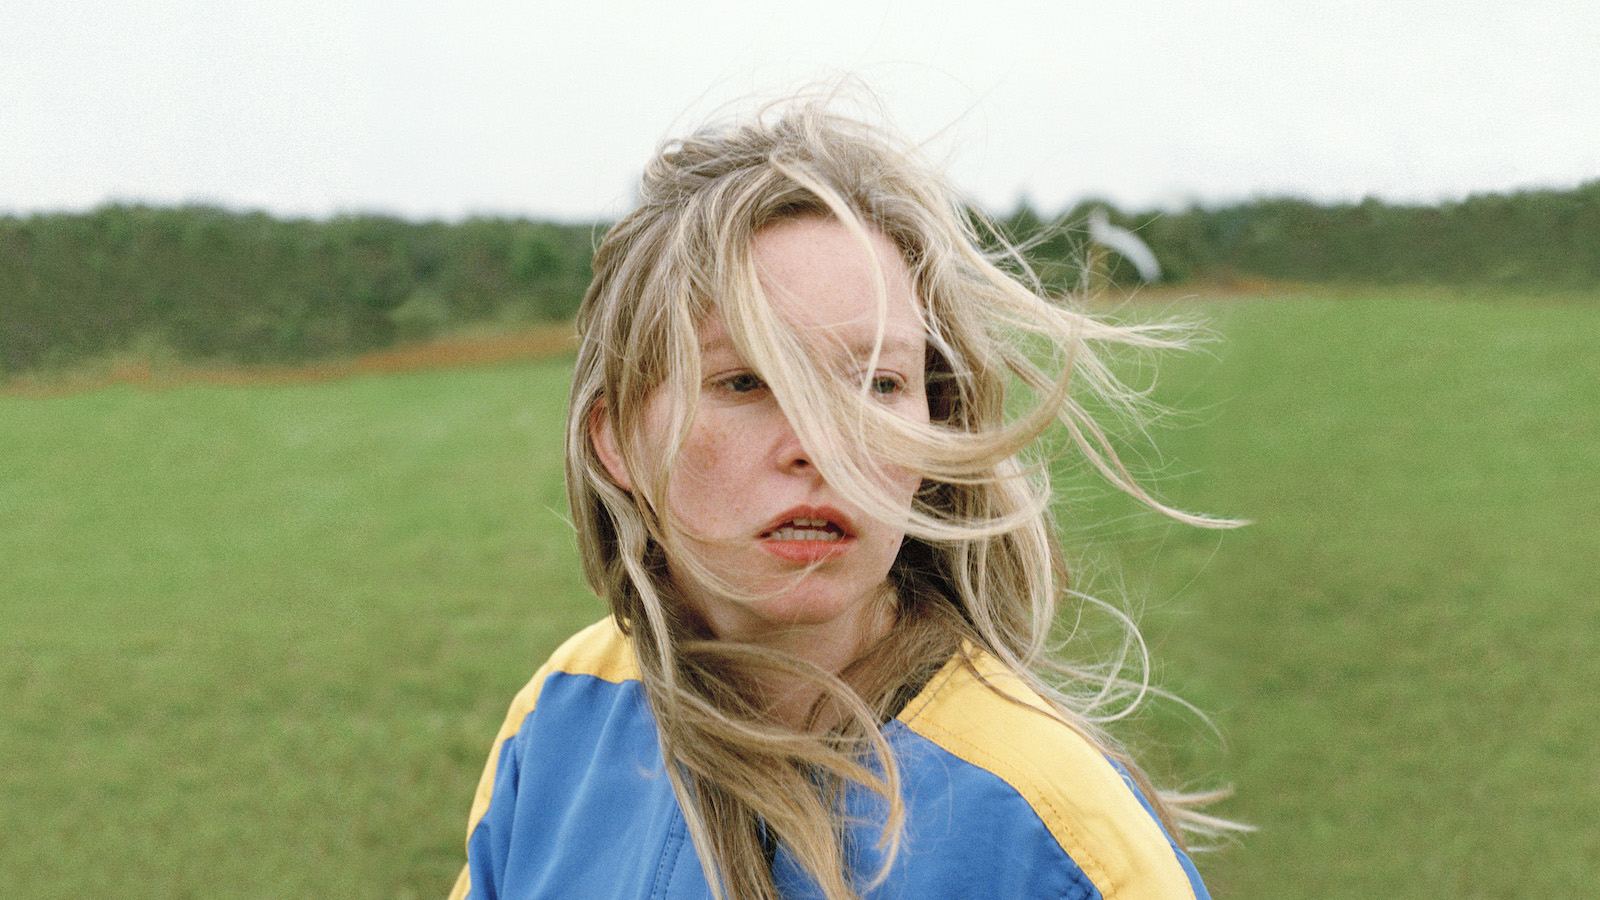 A distressed young woman stands in a field with long windswept blonde hair in her face.